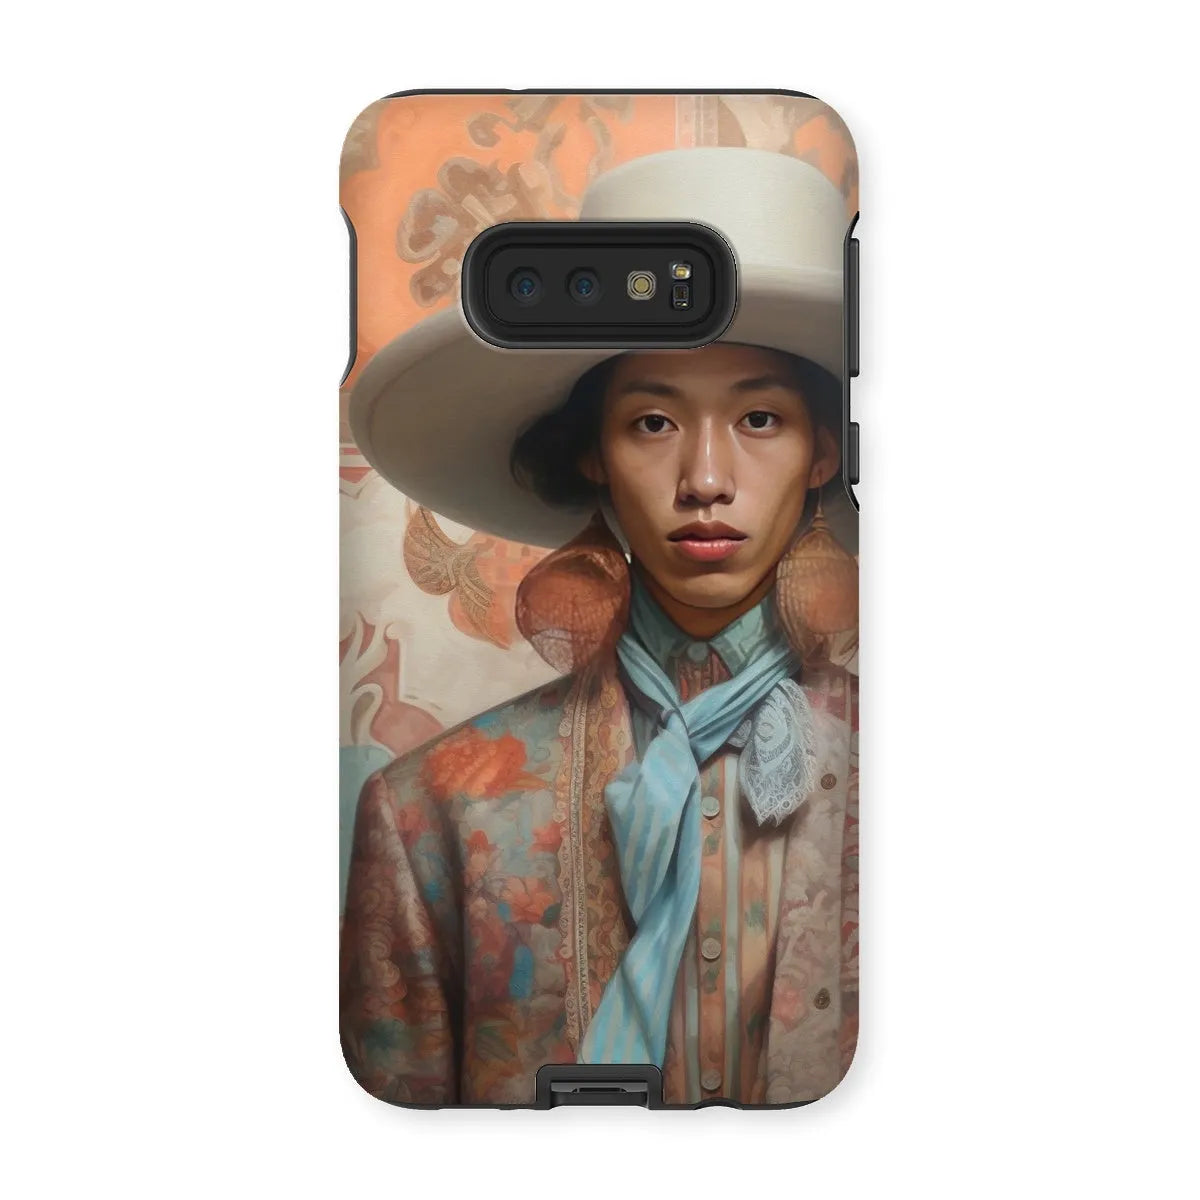 Iyaan The Gay Cowboy - Dandy Gay Aesthetic Art Phone Case - Samsung Galaxy S10e / Matte - Mobile Phone Cases